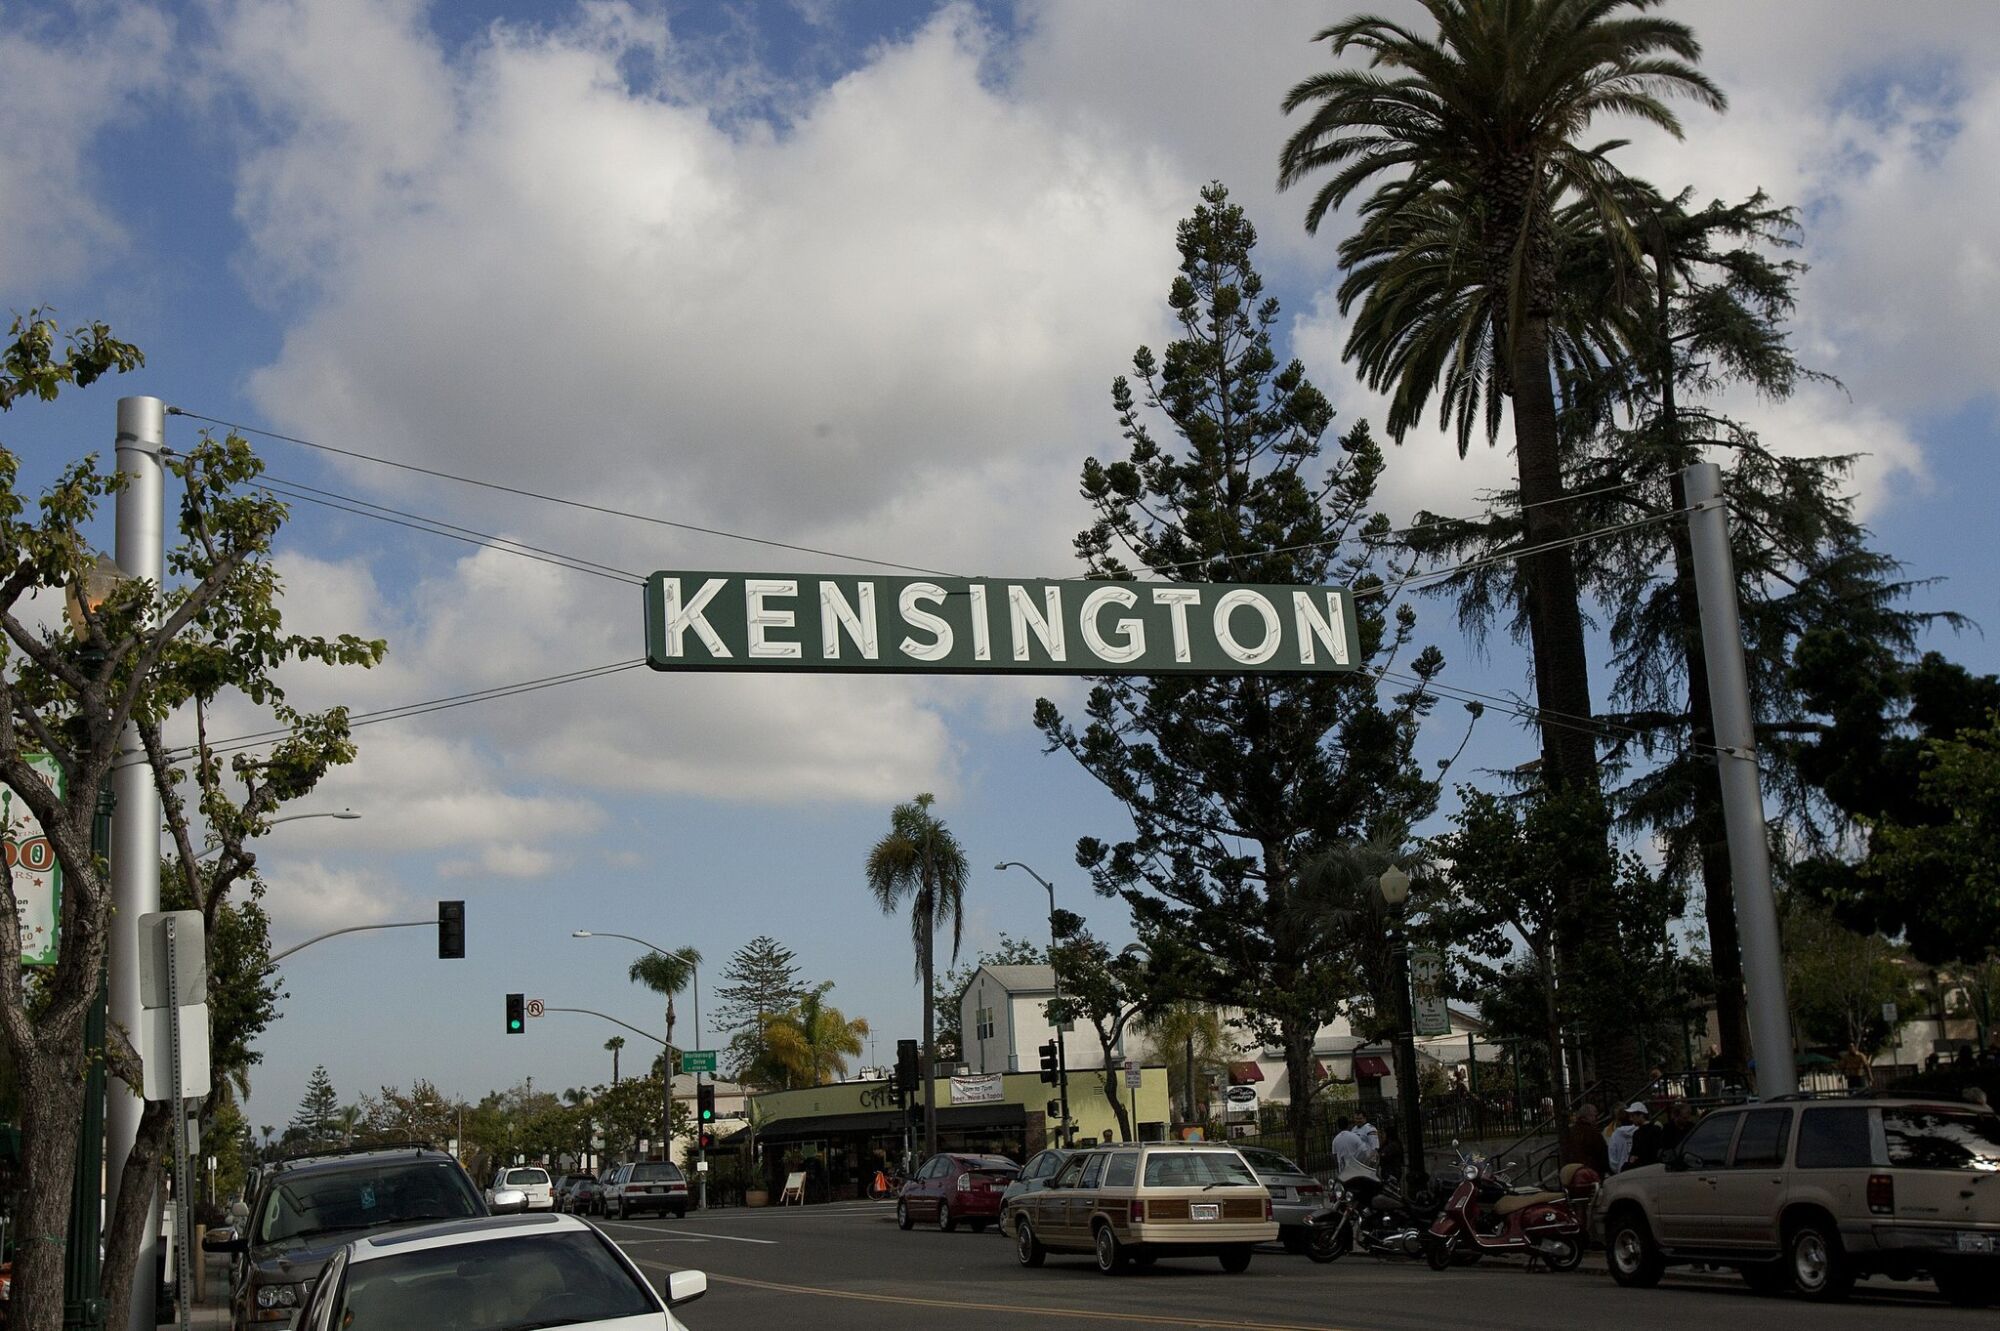 Kensington was founded in 1910.